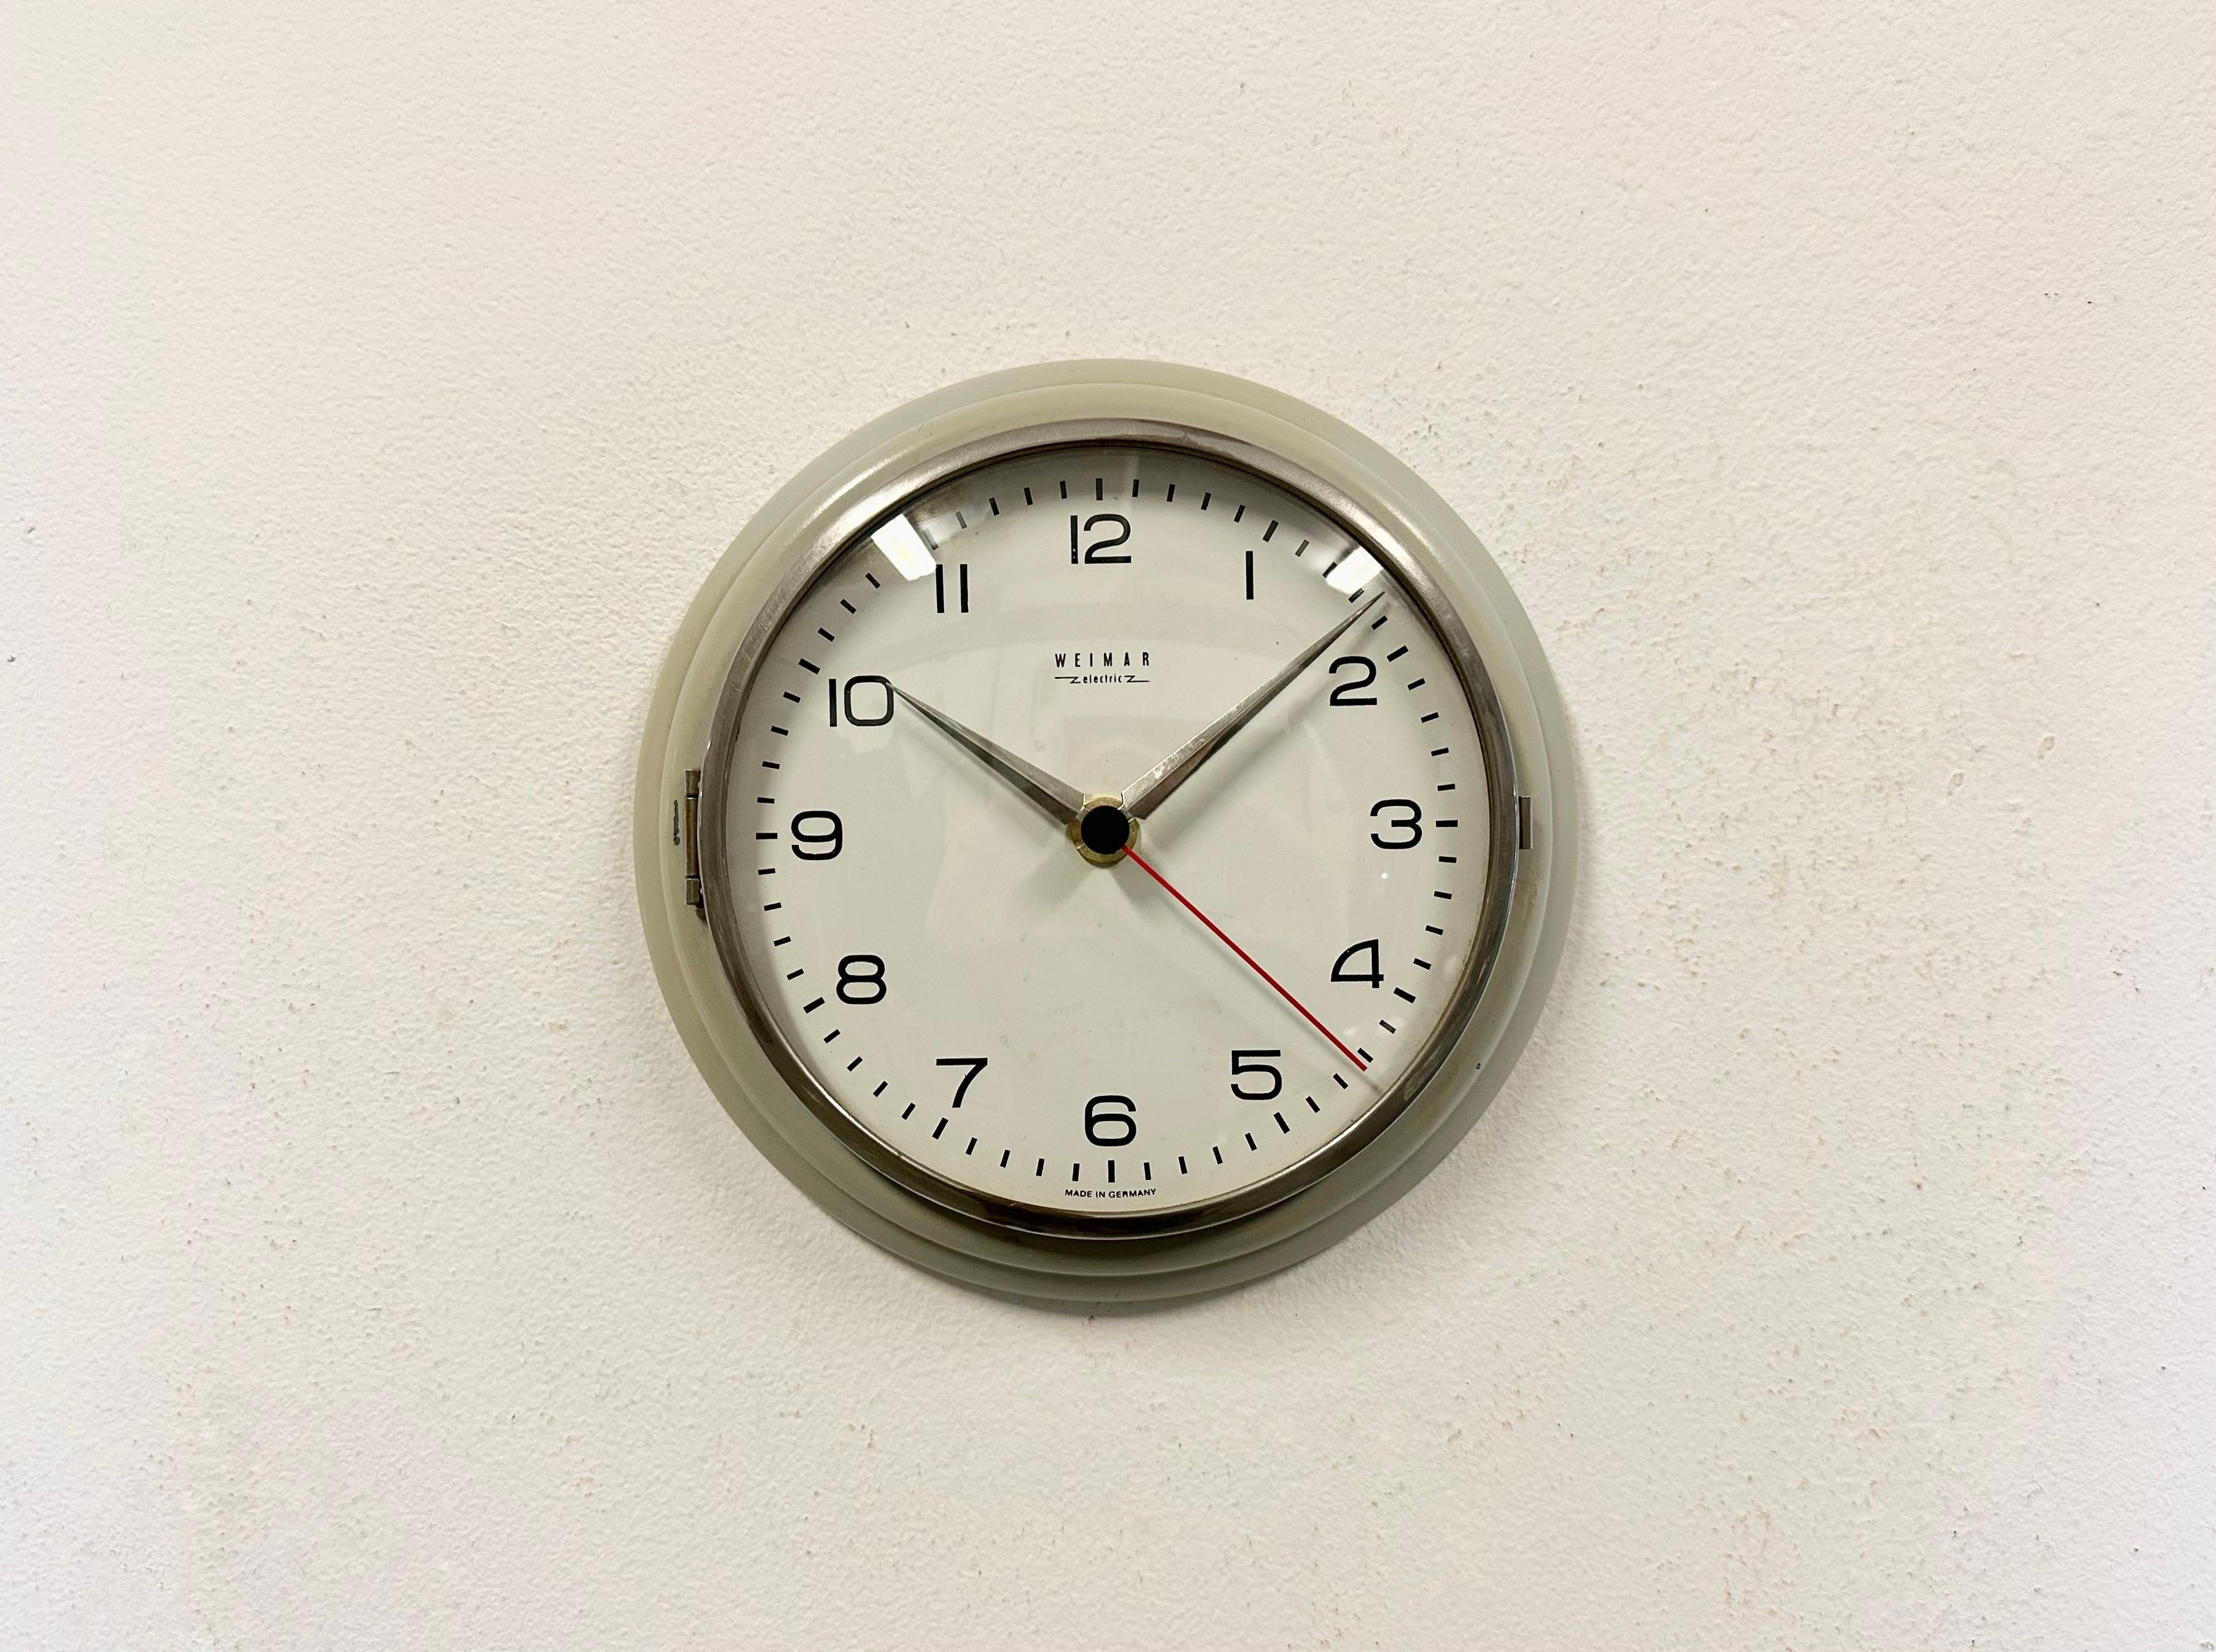 Vintage Industrial wall clock produced by Weimar in former East Germany during the 1970s. It features a grey iron frame, a metal dial, an aluminium hands and a curved clear glass cover. The battery-powered clockwork requires one AA battery.